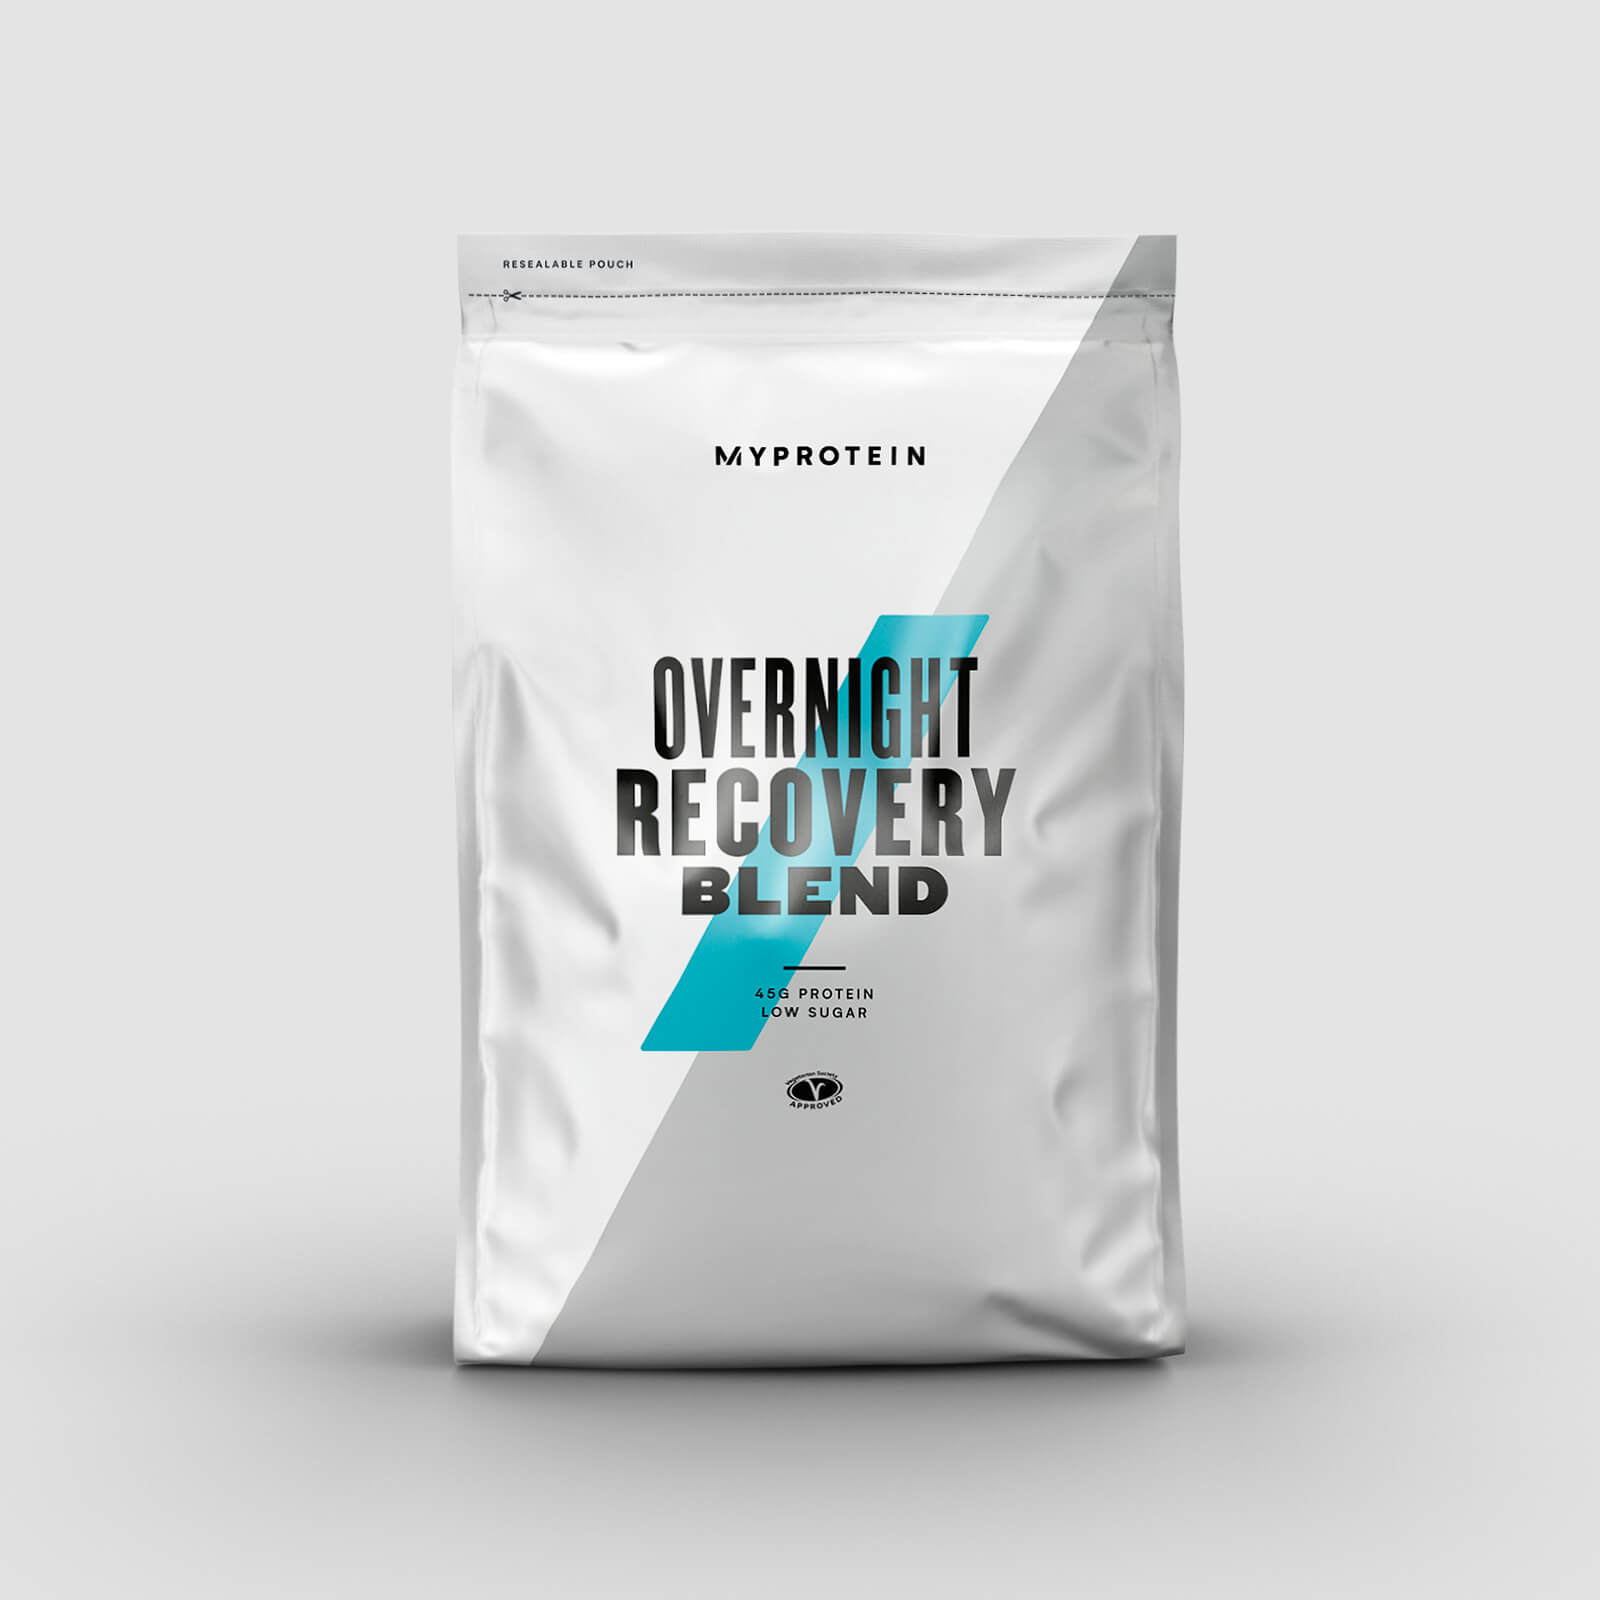 Myprotein Overnight Recovery Blend - 2.5kg - Chocolate Smooth